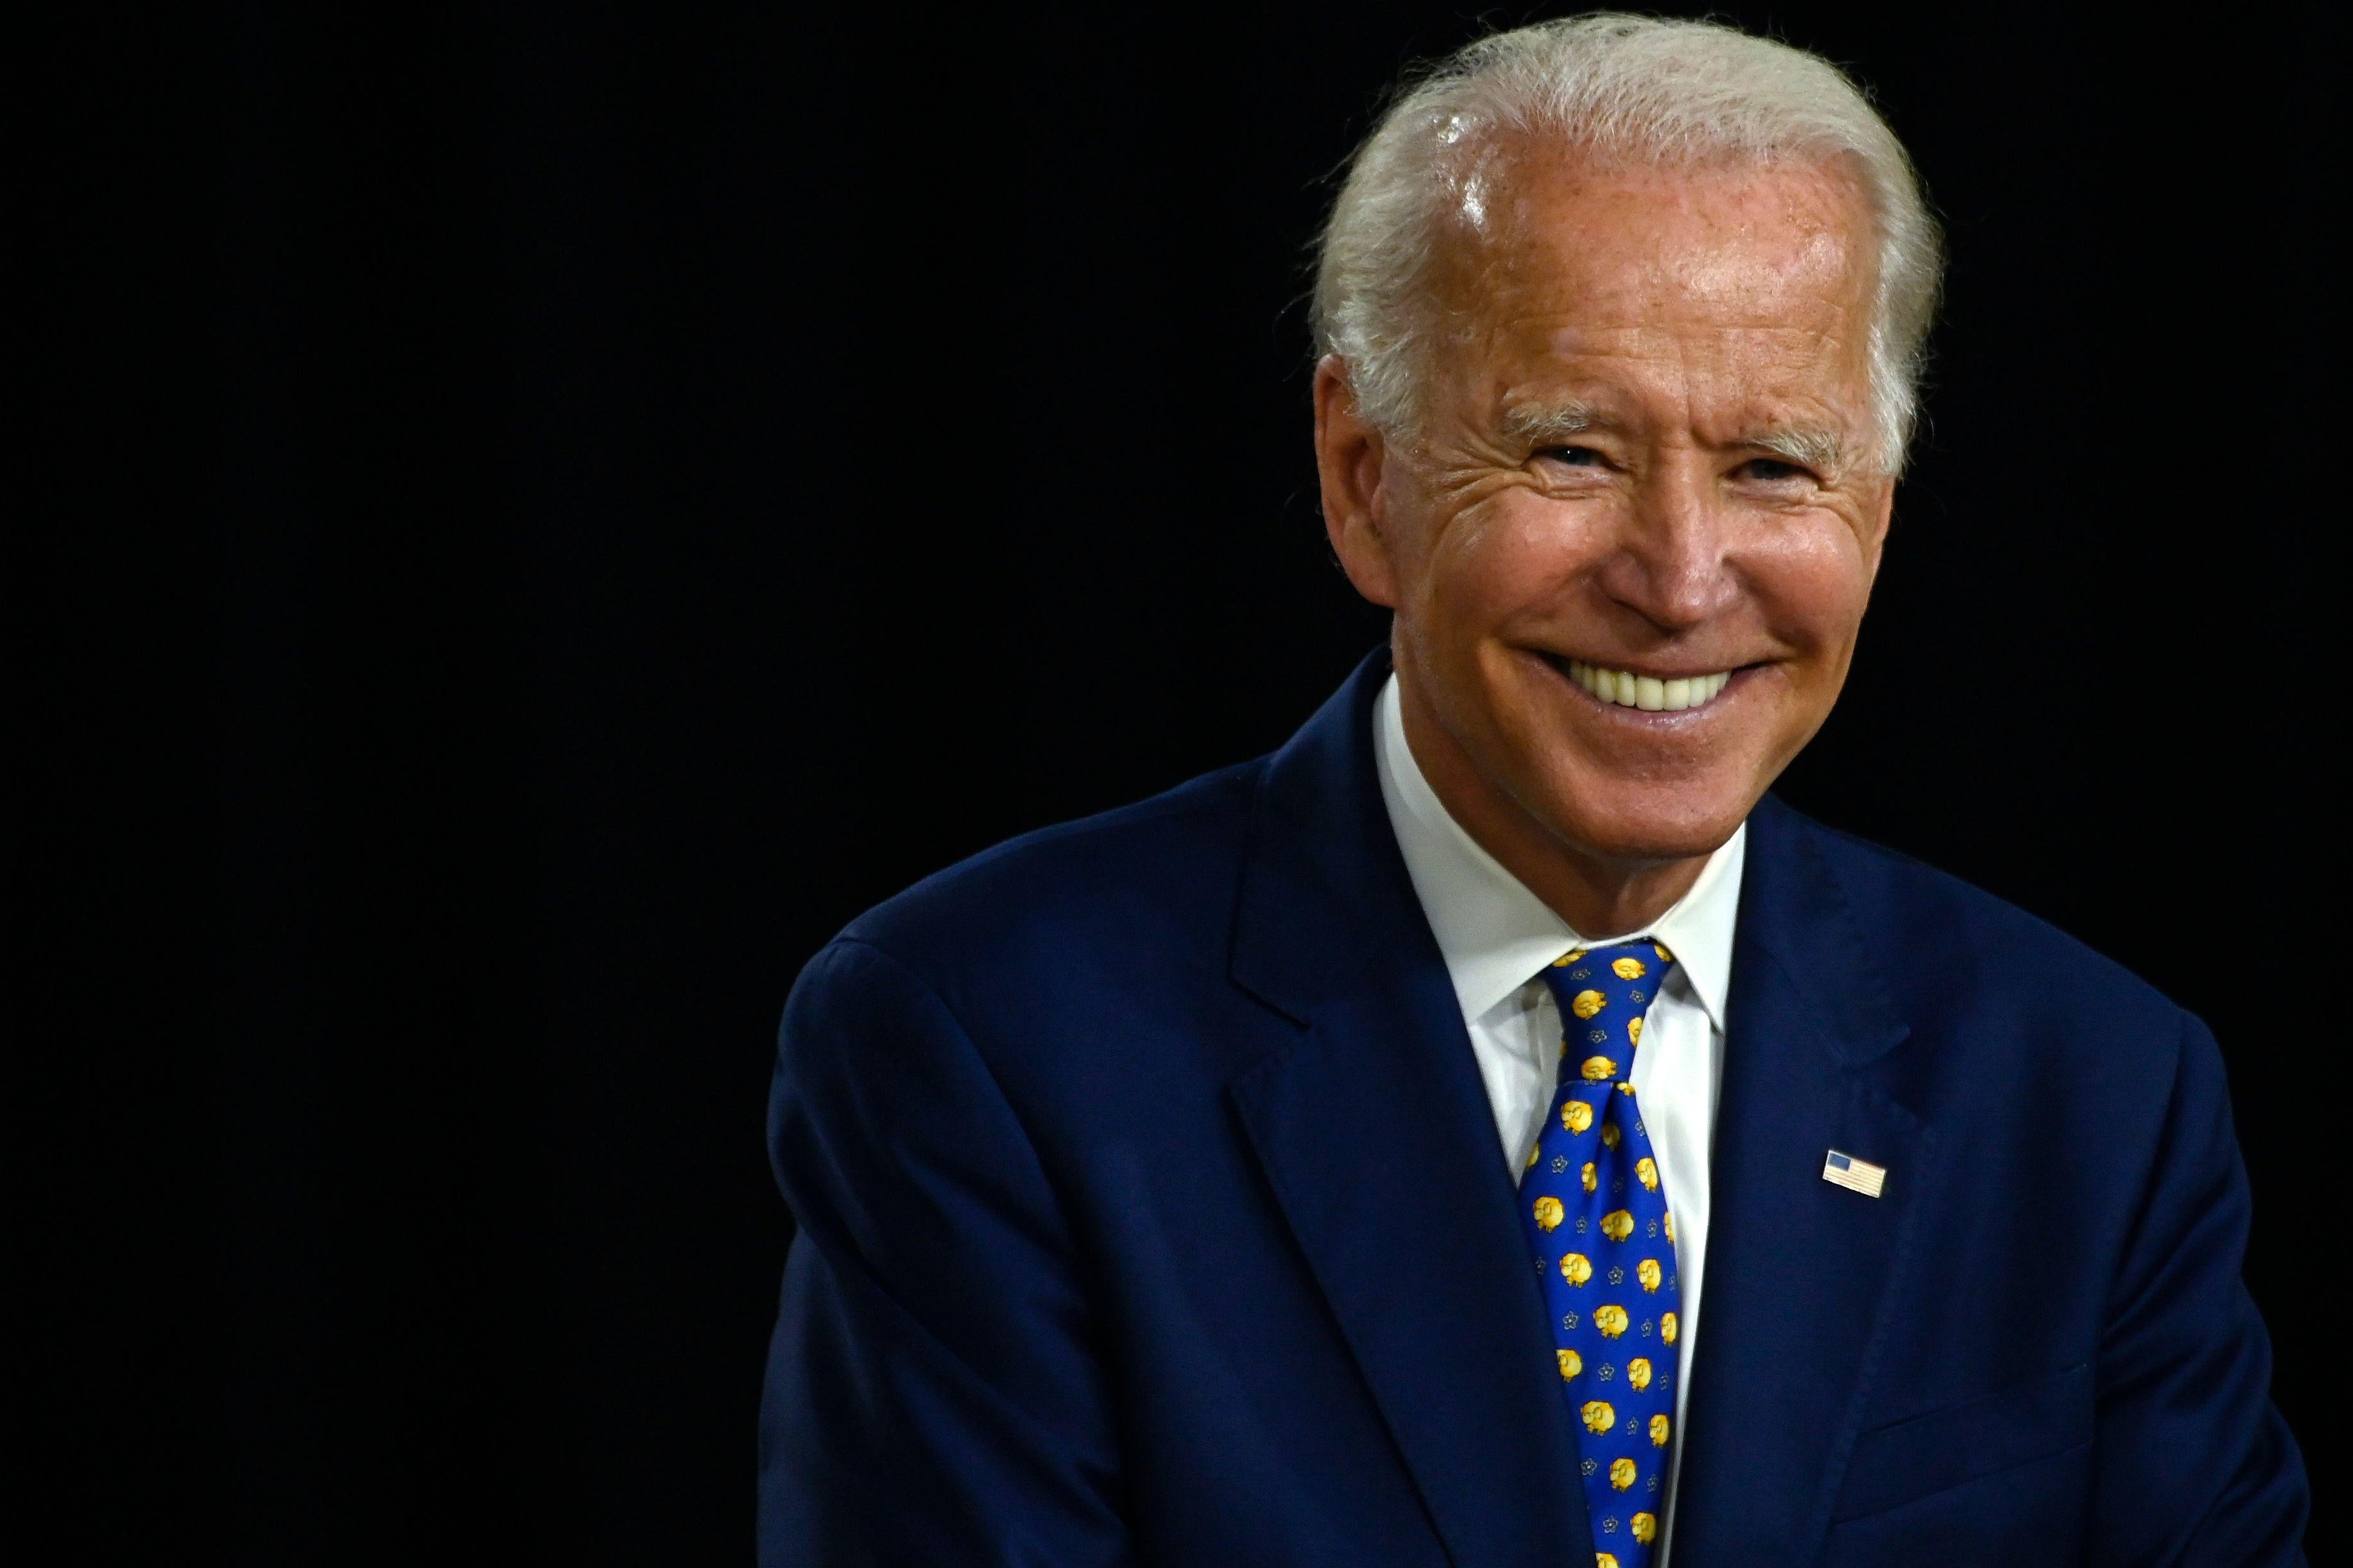 Former Vice President Joe Biden smiles as he speaks during a campaign event at the William “Hicks” Anderson Community Center in Wilmington, Delaware on July 28, 2020.